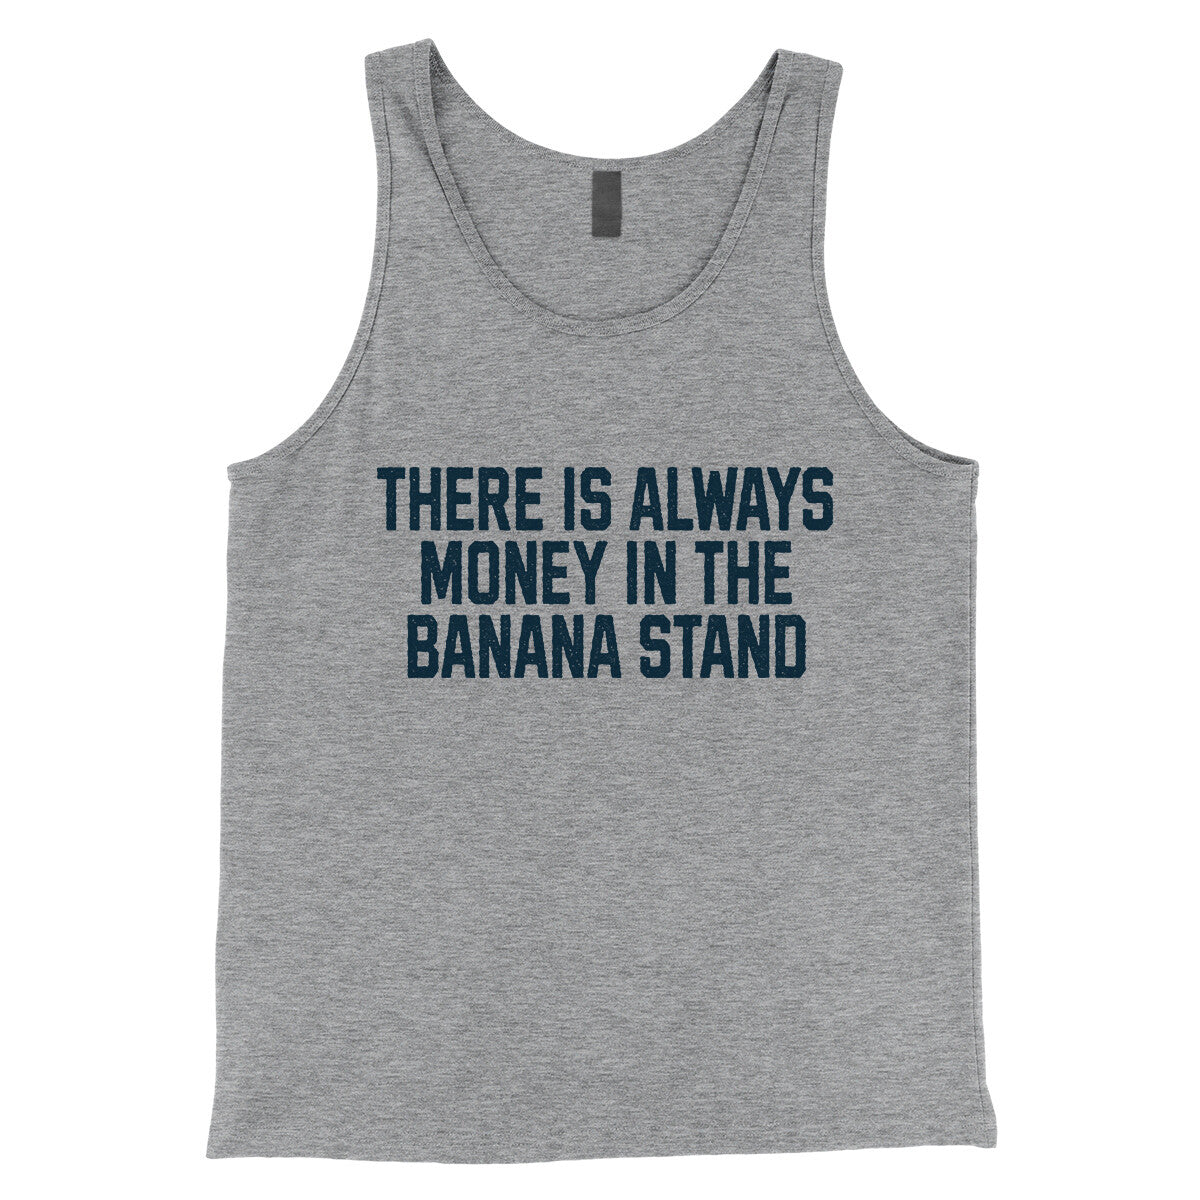 There is Always Money in the Banana Stand in Athletic Heather Color